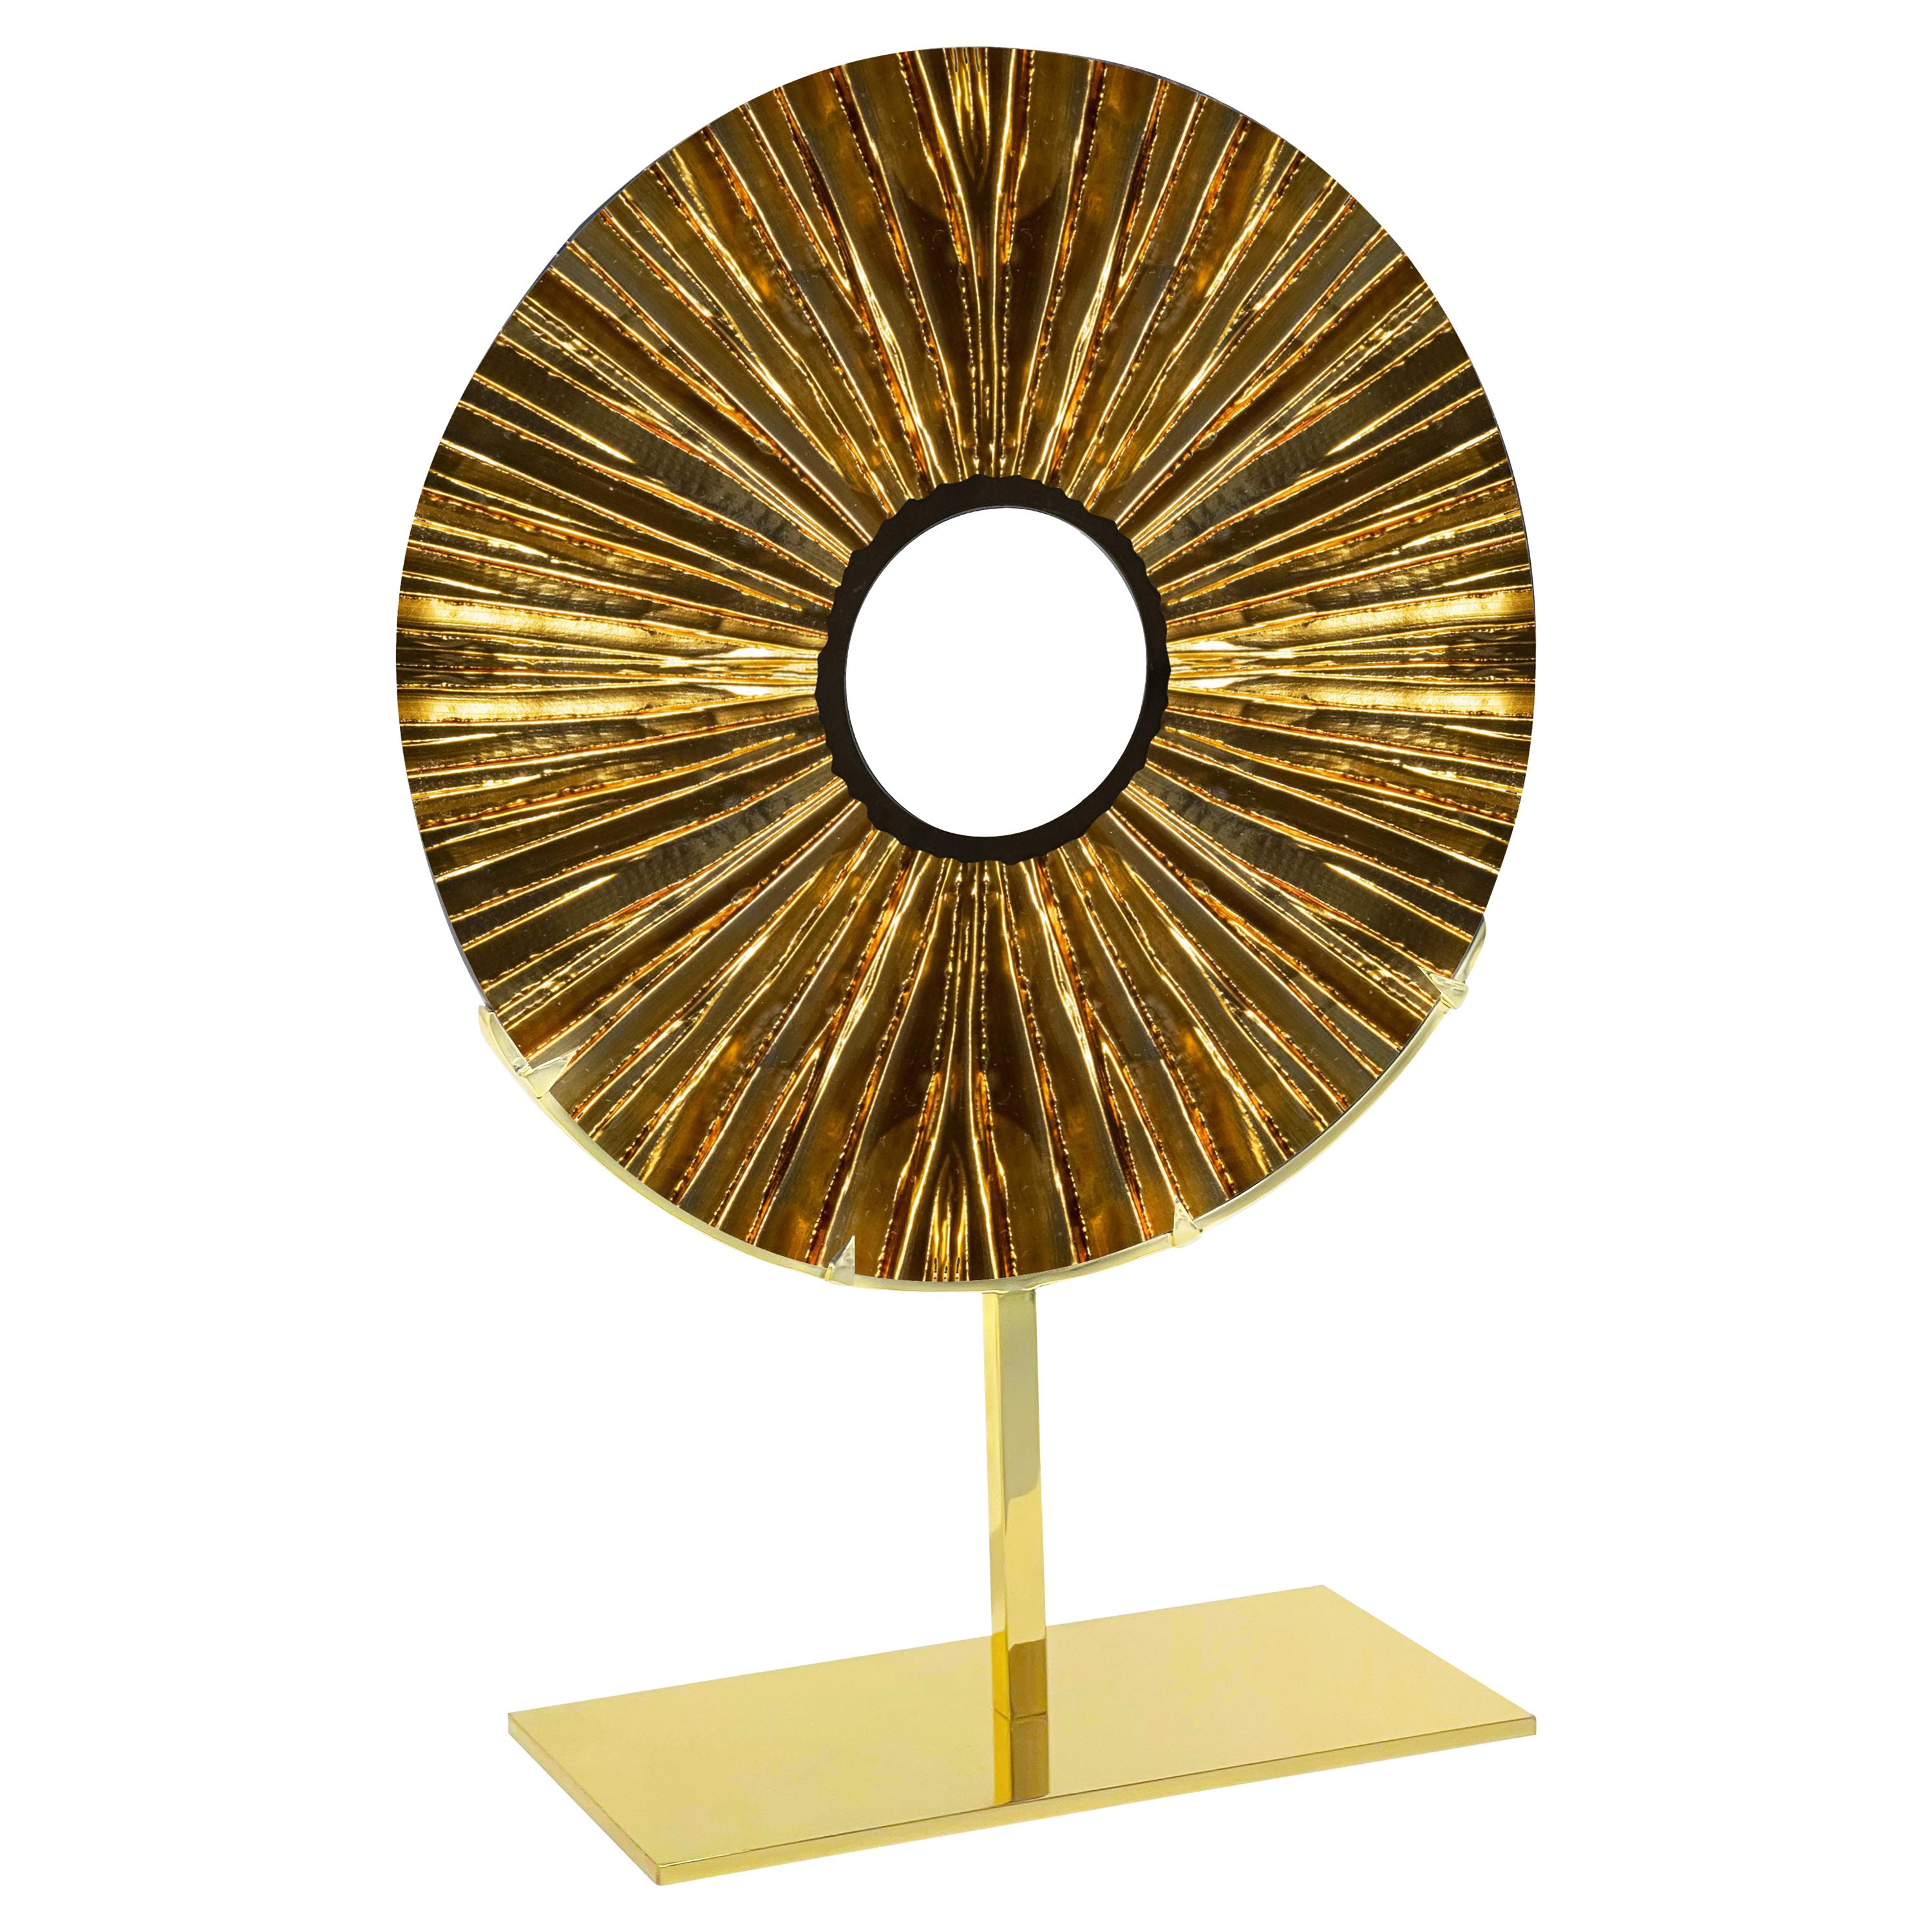 Contemporary by Ghirò Studio 'Eye' Sculpture Amber Glass, Brass and 24 Kt Gold